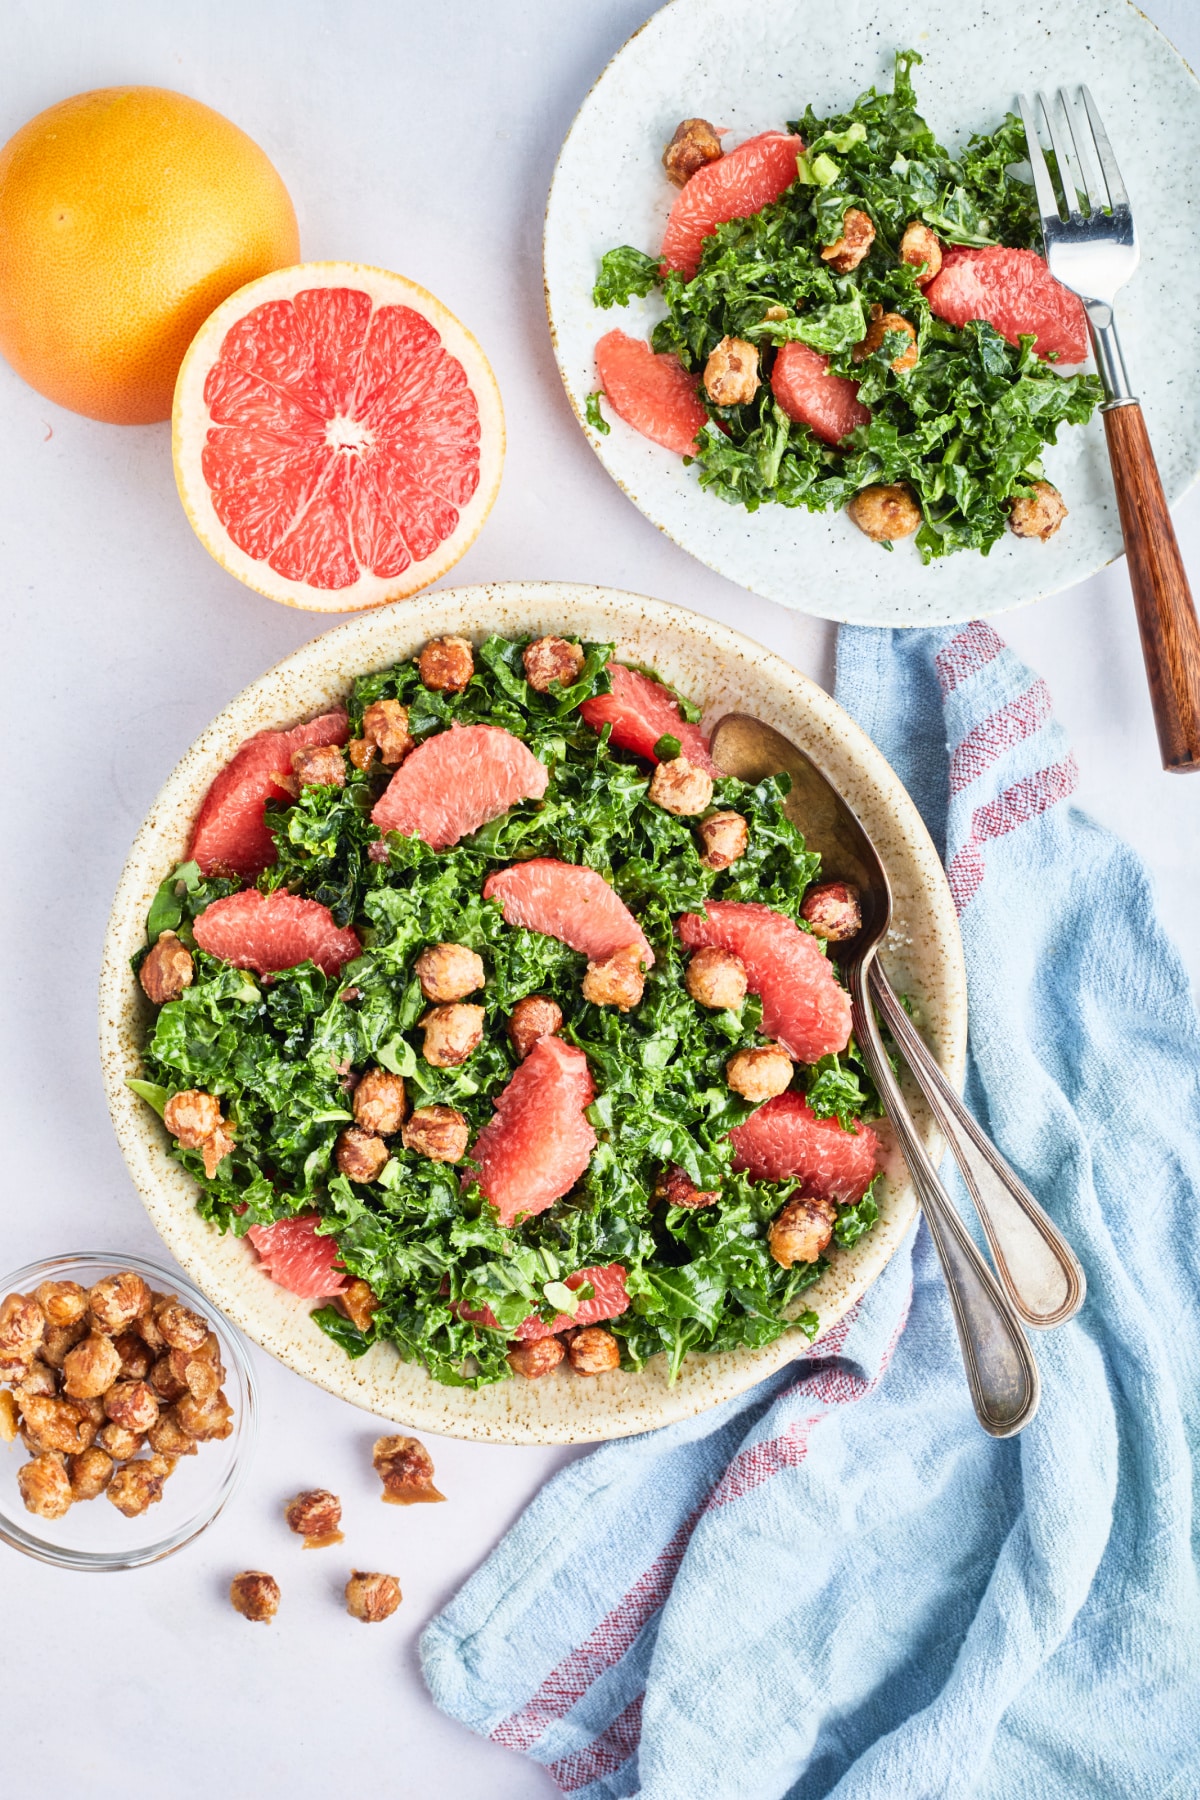 Overhead view of a large stoneware serving bowl of grapefruit kale salad sits on a white surface. Next to the bowl of salad is a fresh grapefruit cut in half, a plate of salad, a few hazelnuts, and a blue cloth napkin.